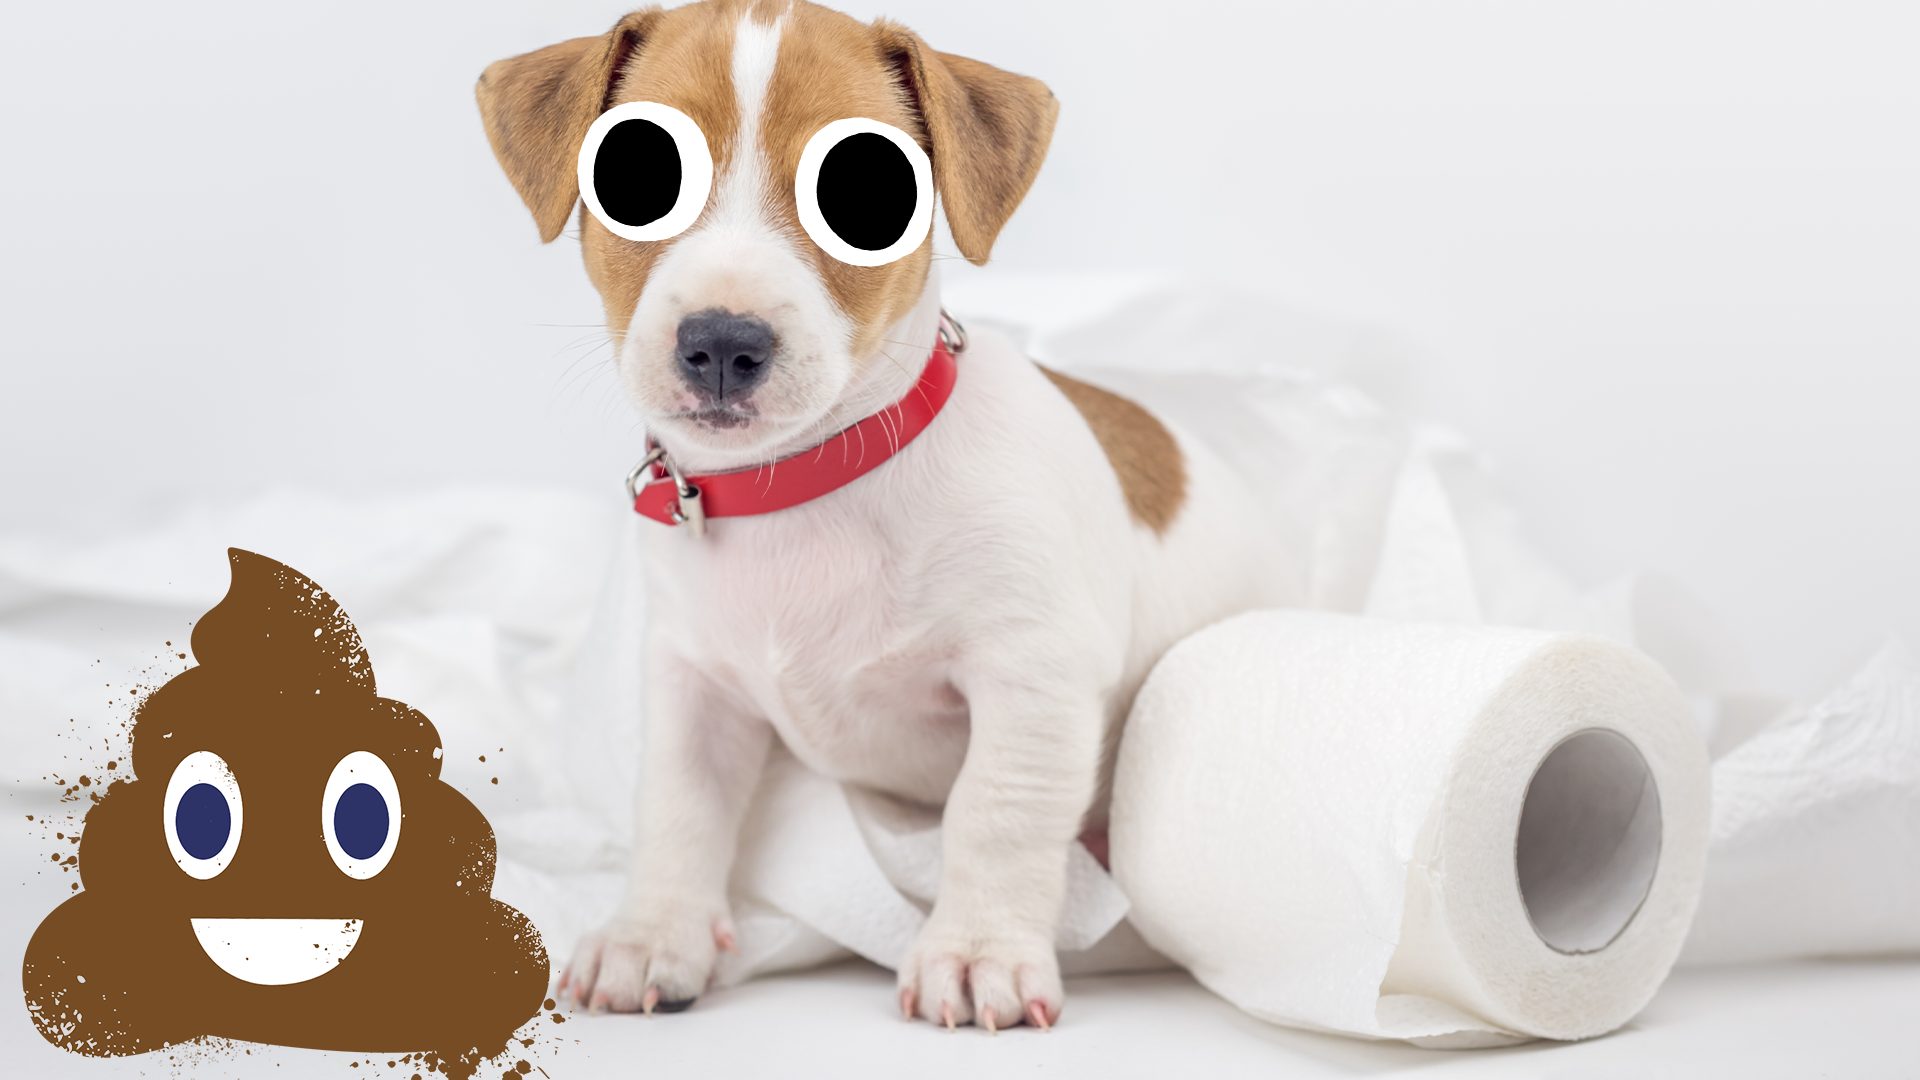 Puppy with loo roll and a poop emoji 